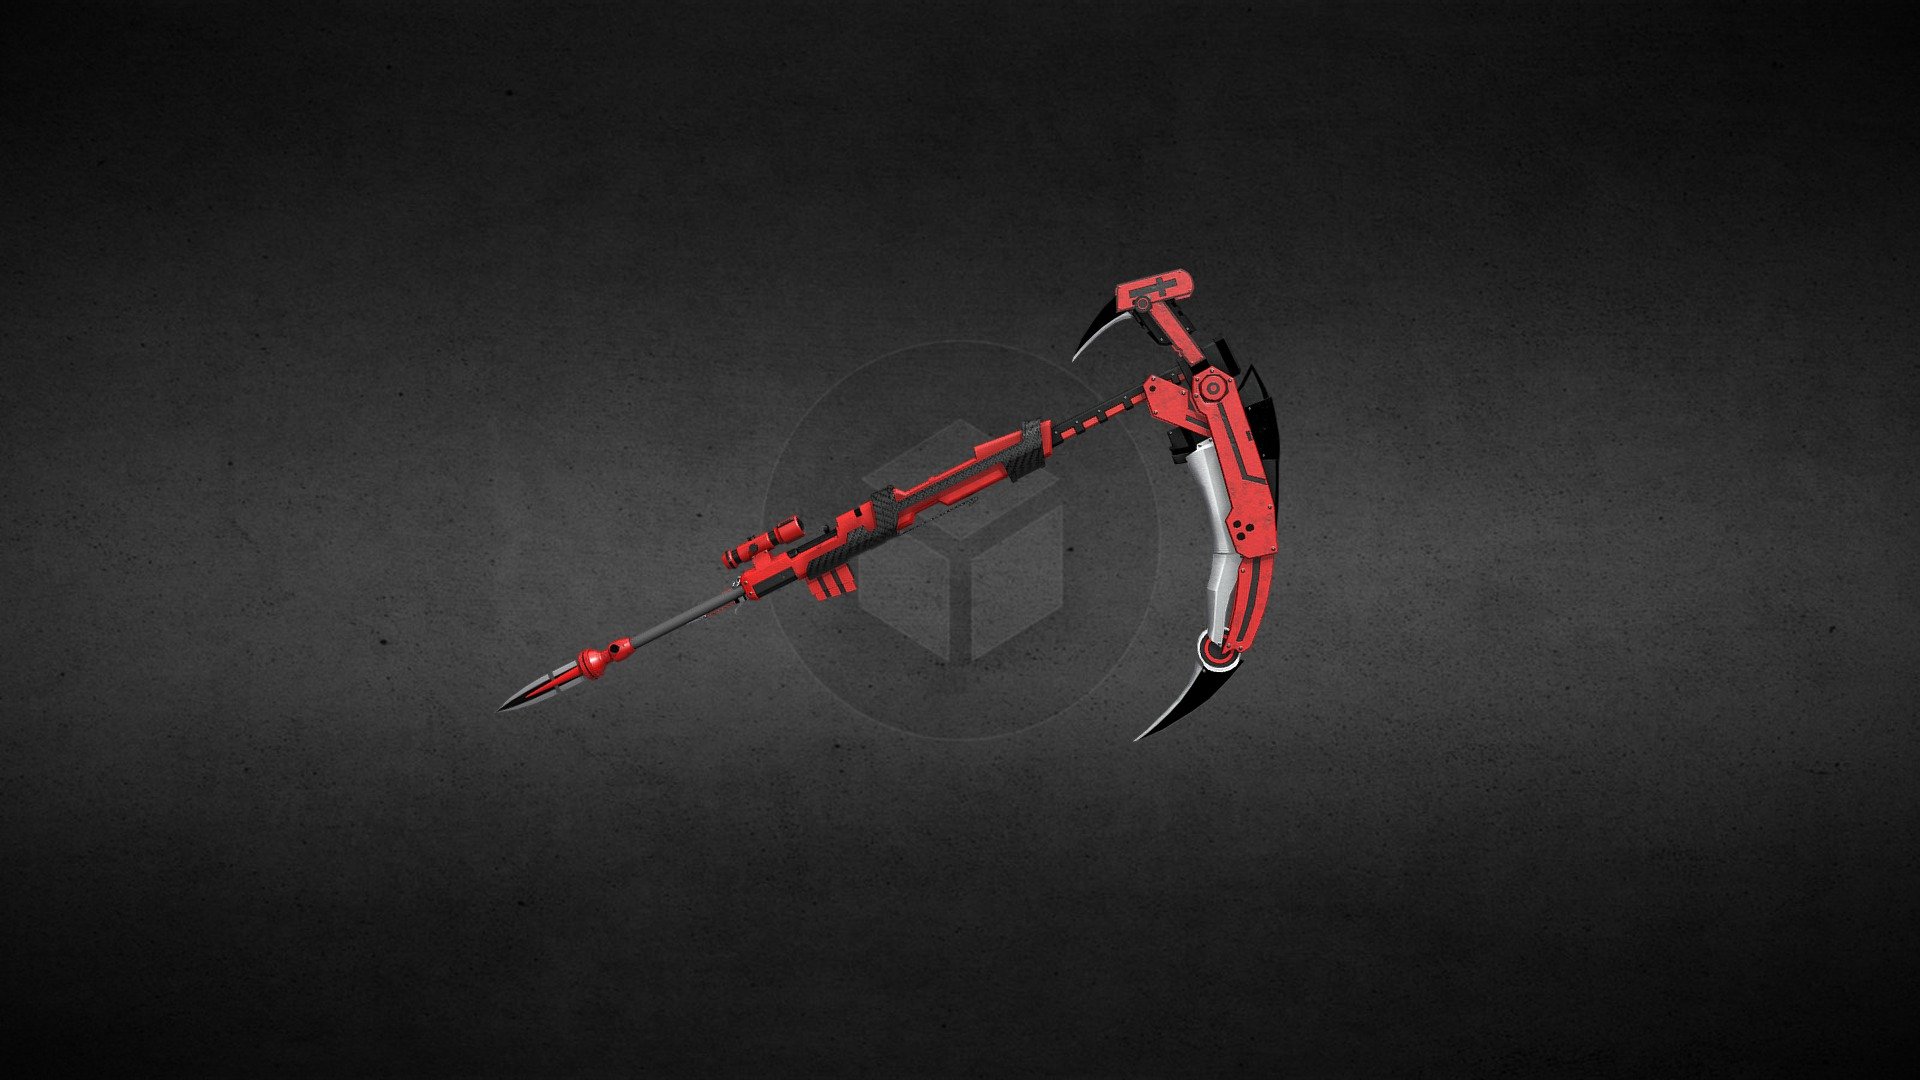 RWBY Crescent Rose Scythe (unofficial)